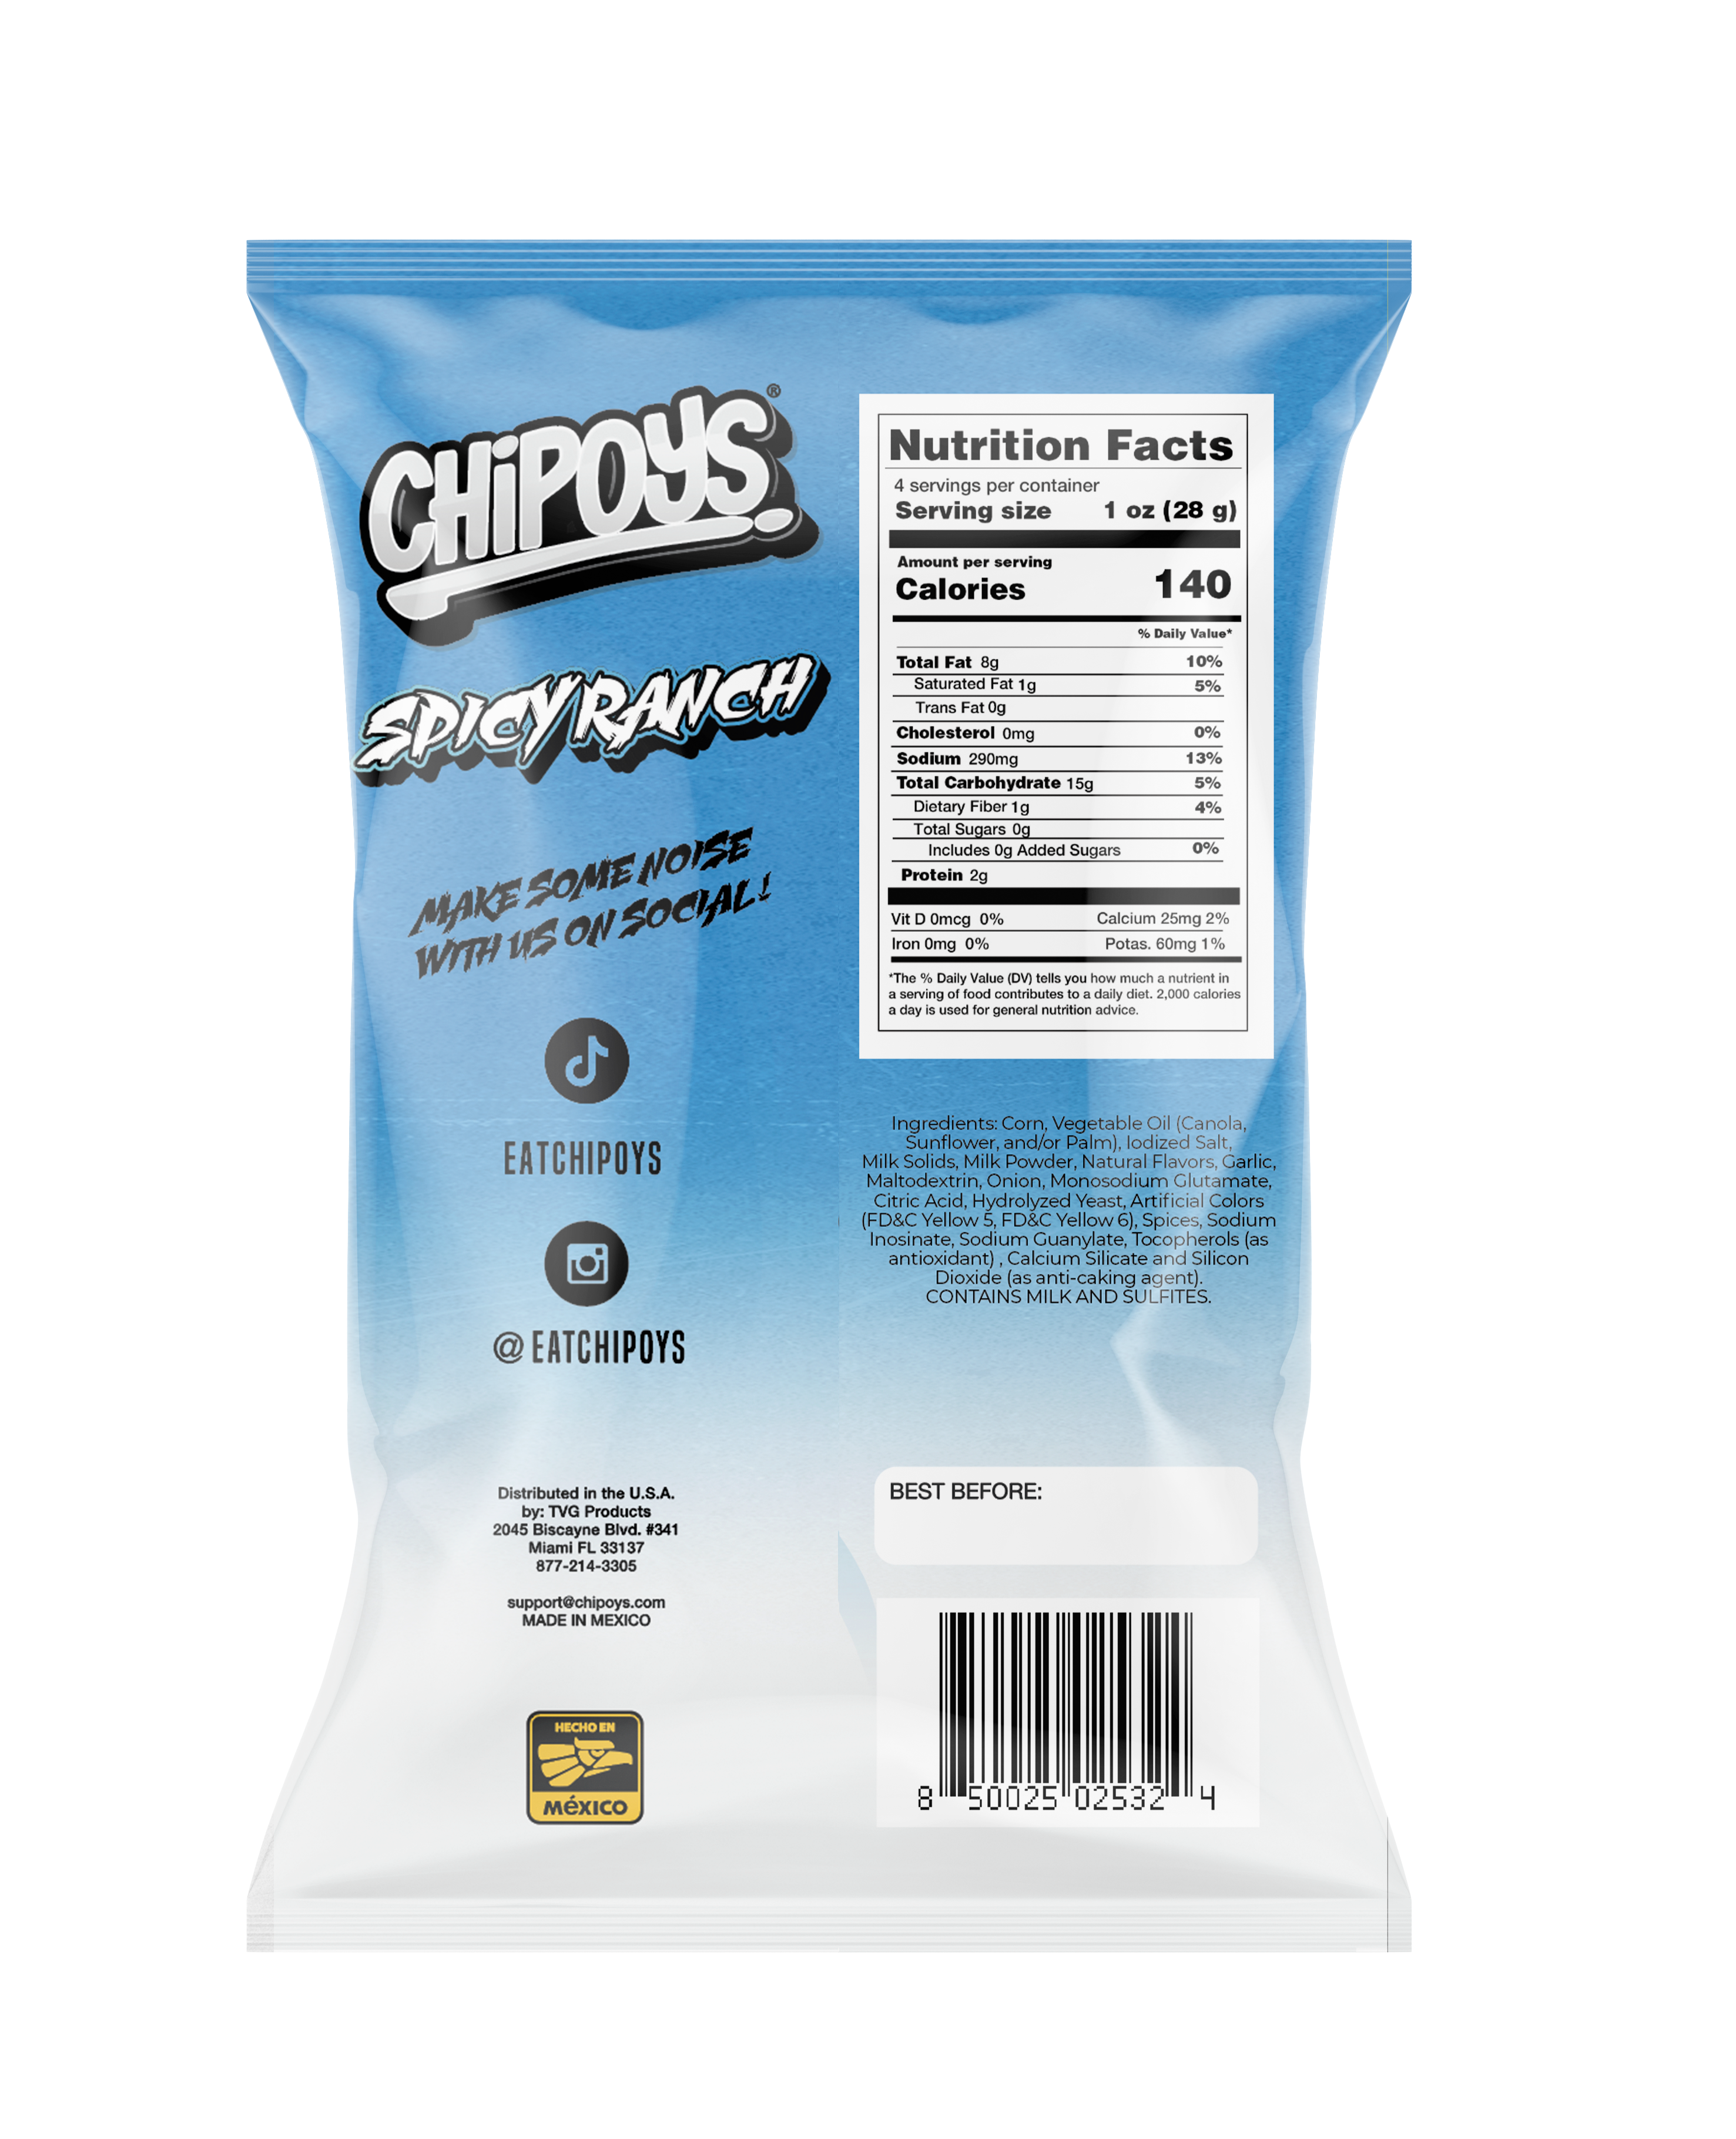 CHIPOYS Spicy Ranch 4 oz 12 innerpacks per case 114 g